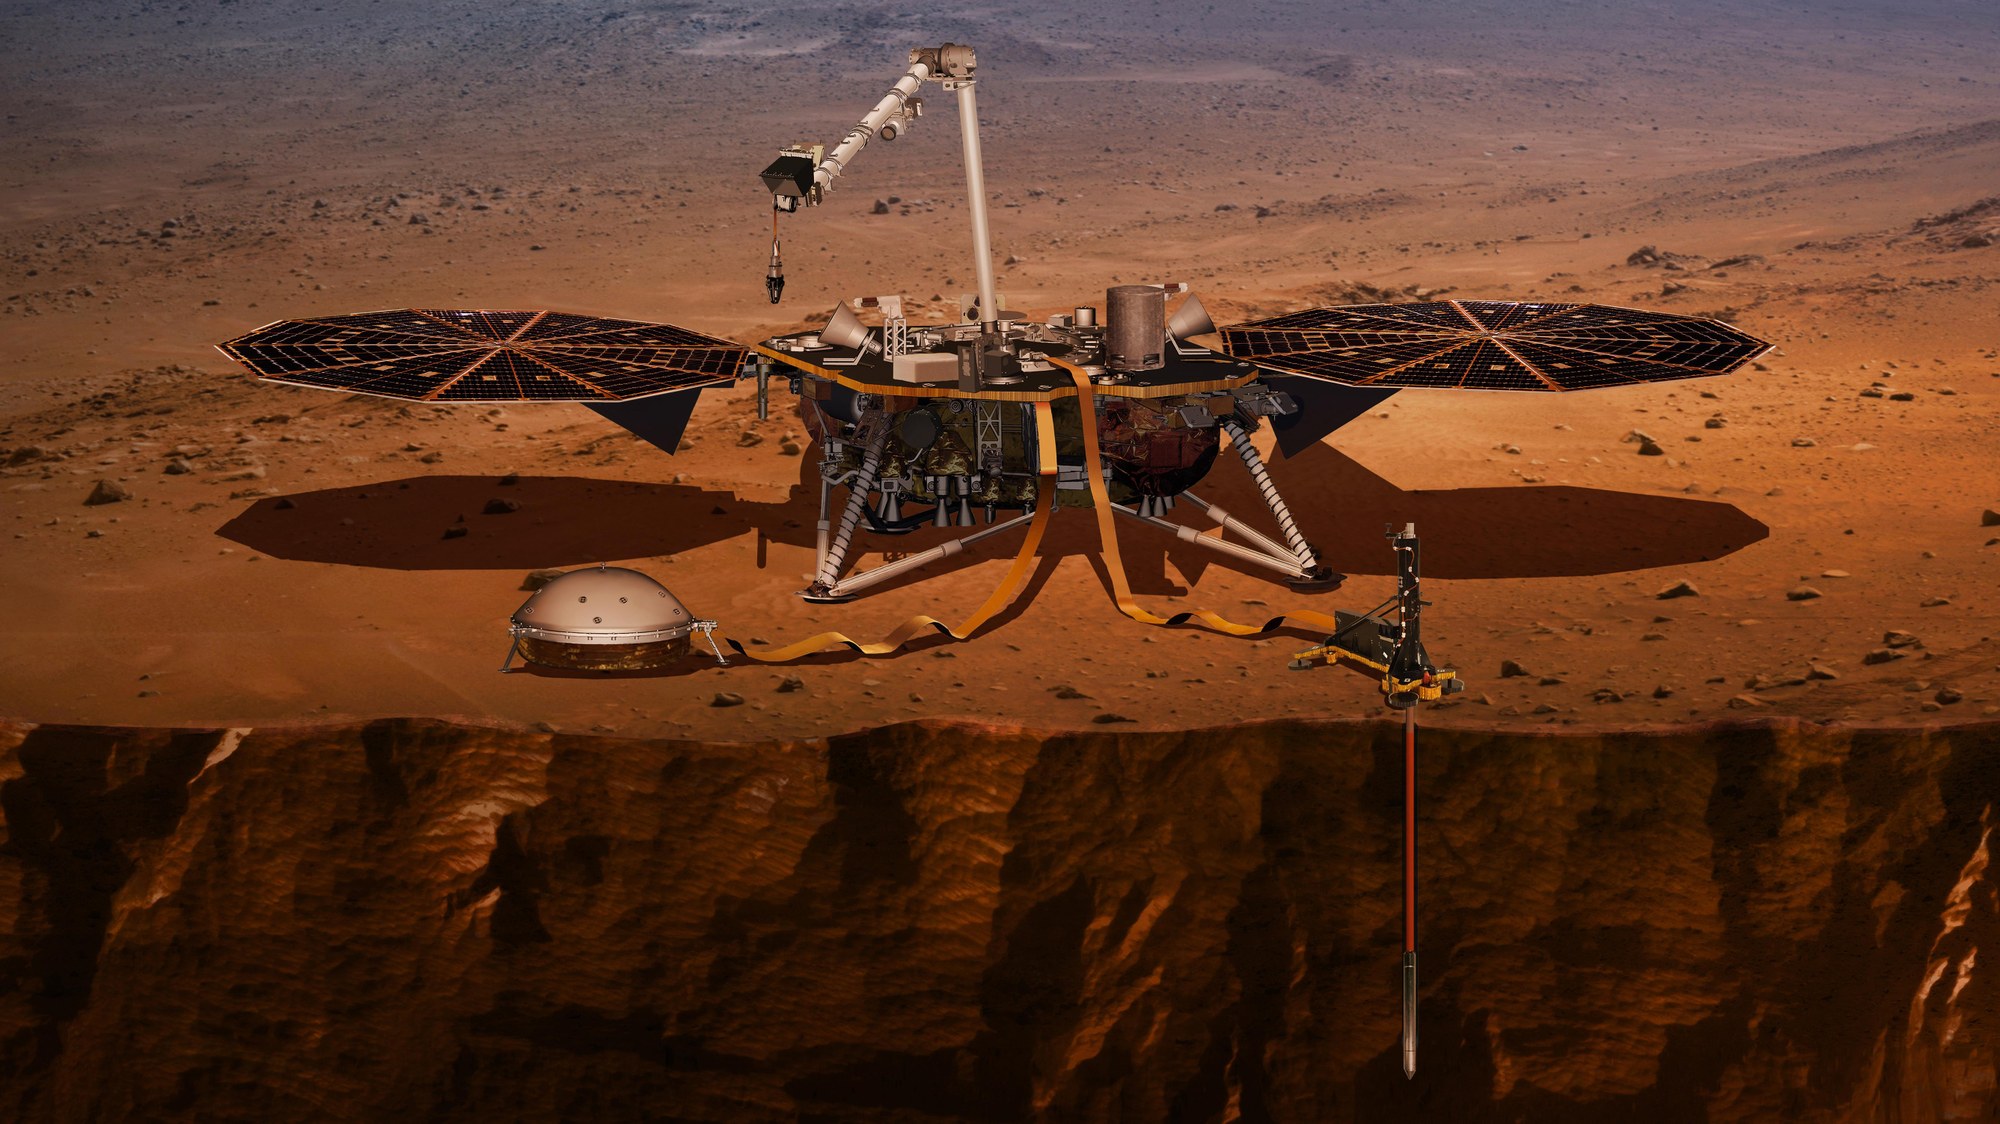 Artist’s impression of the NASA InSight lander on the Martian surface